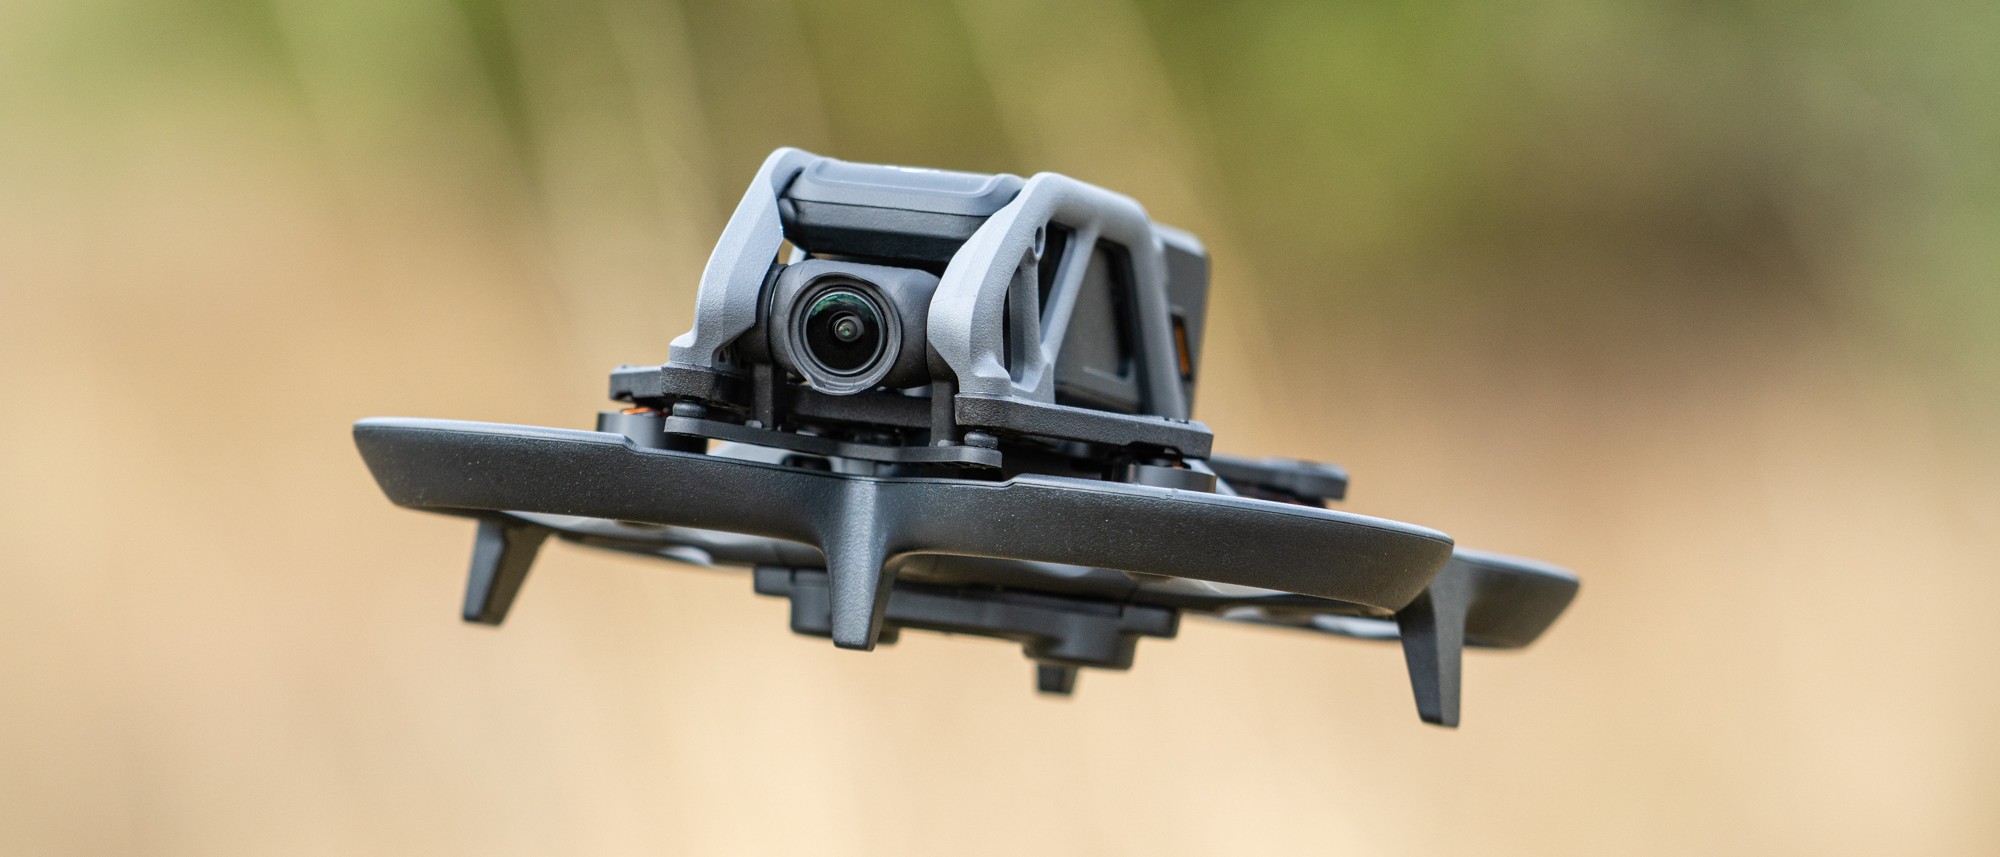 DJI Avata In-Depth Review: Everything you need to know